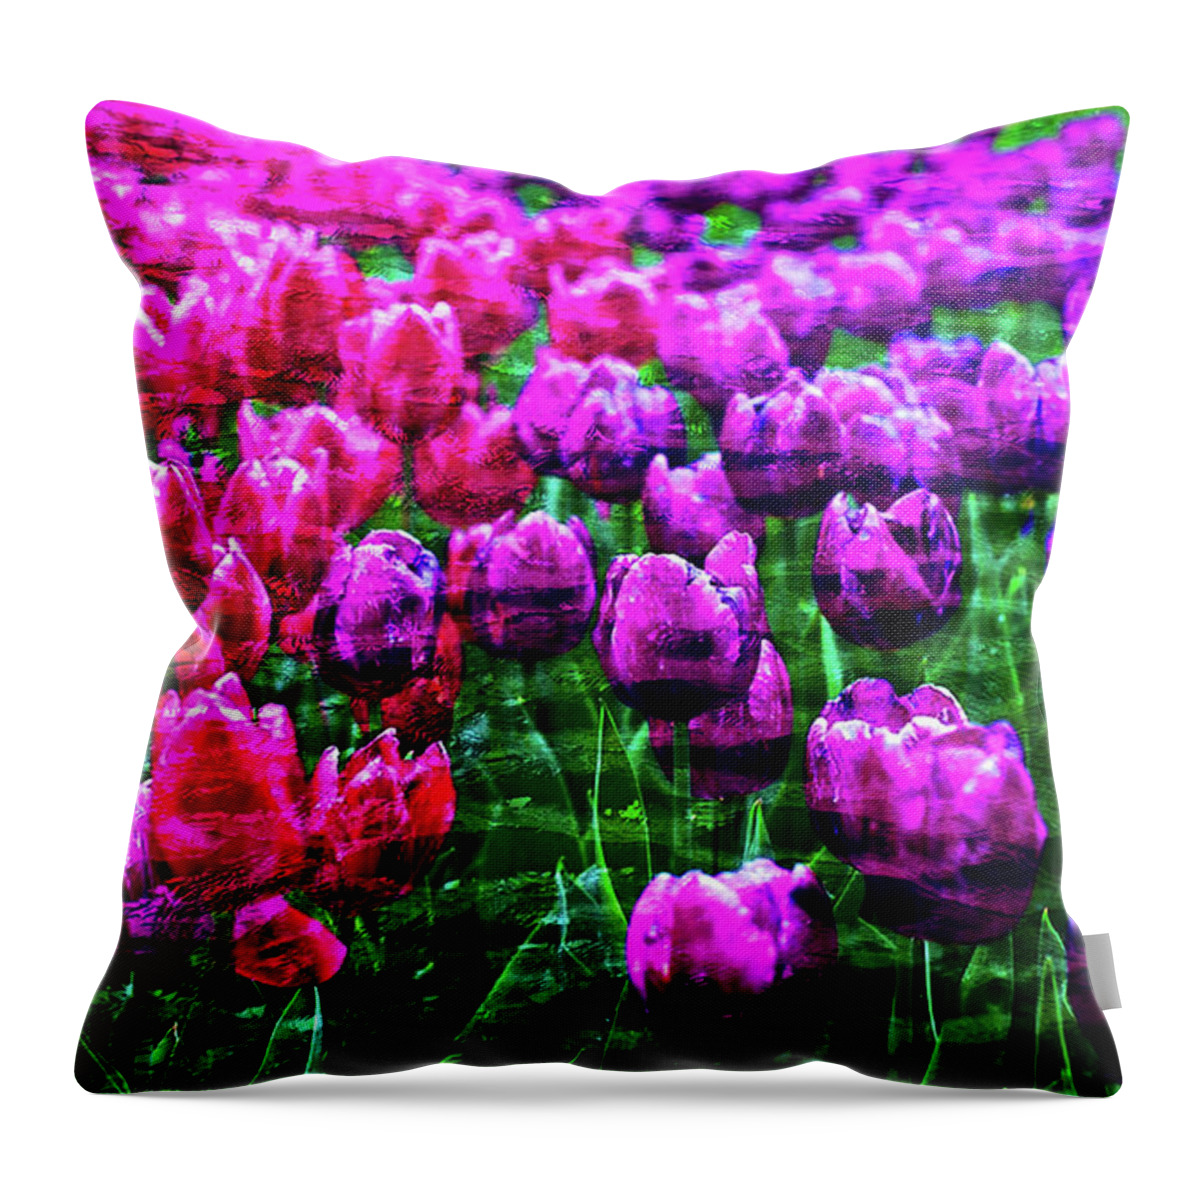 Texture Throw Pillow featuring the photograph Texture Flowers #13 by Prince Andre Faubert